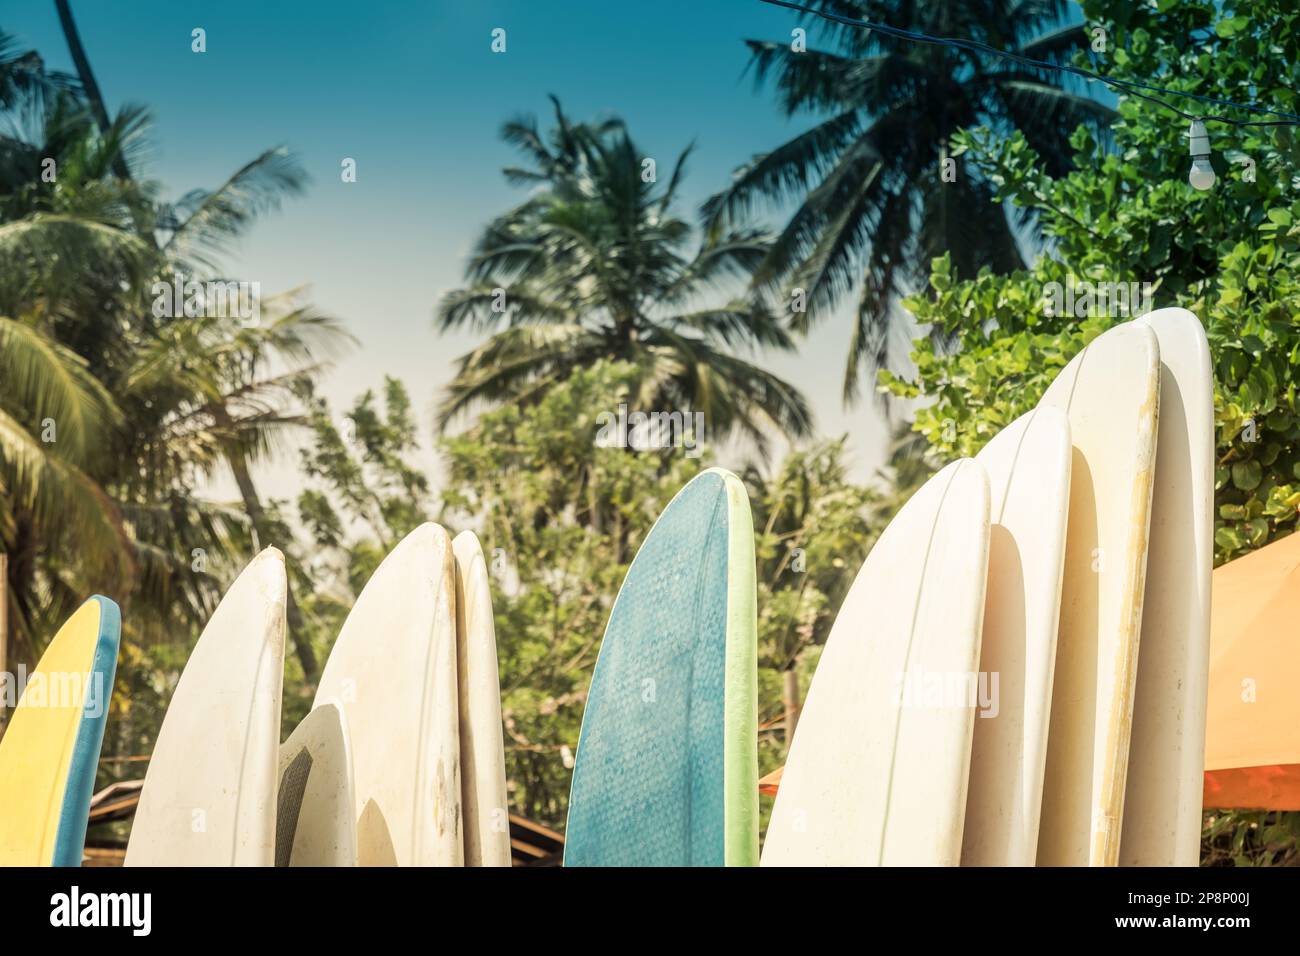 Different surf boards in stack for rent by ocean on sandy Hiriketiya Beach near Dickwella in Sri Lanka. Outdoors. Sunny days. Surf boards for beginner Stock Photo